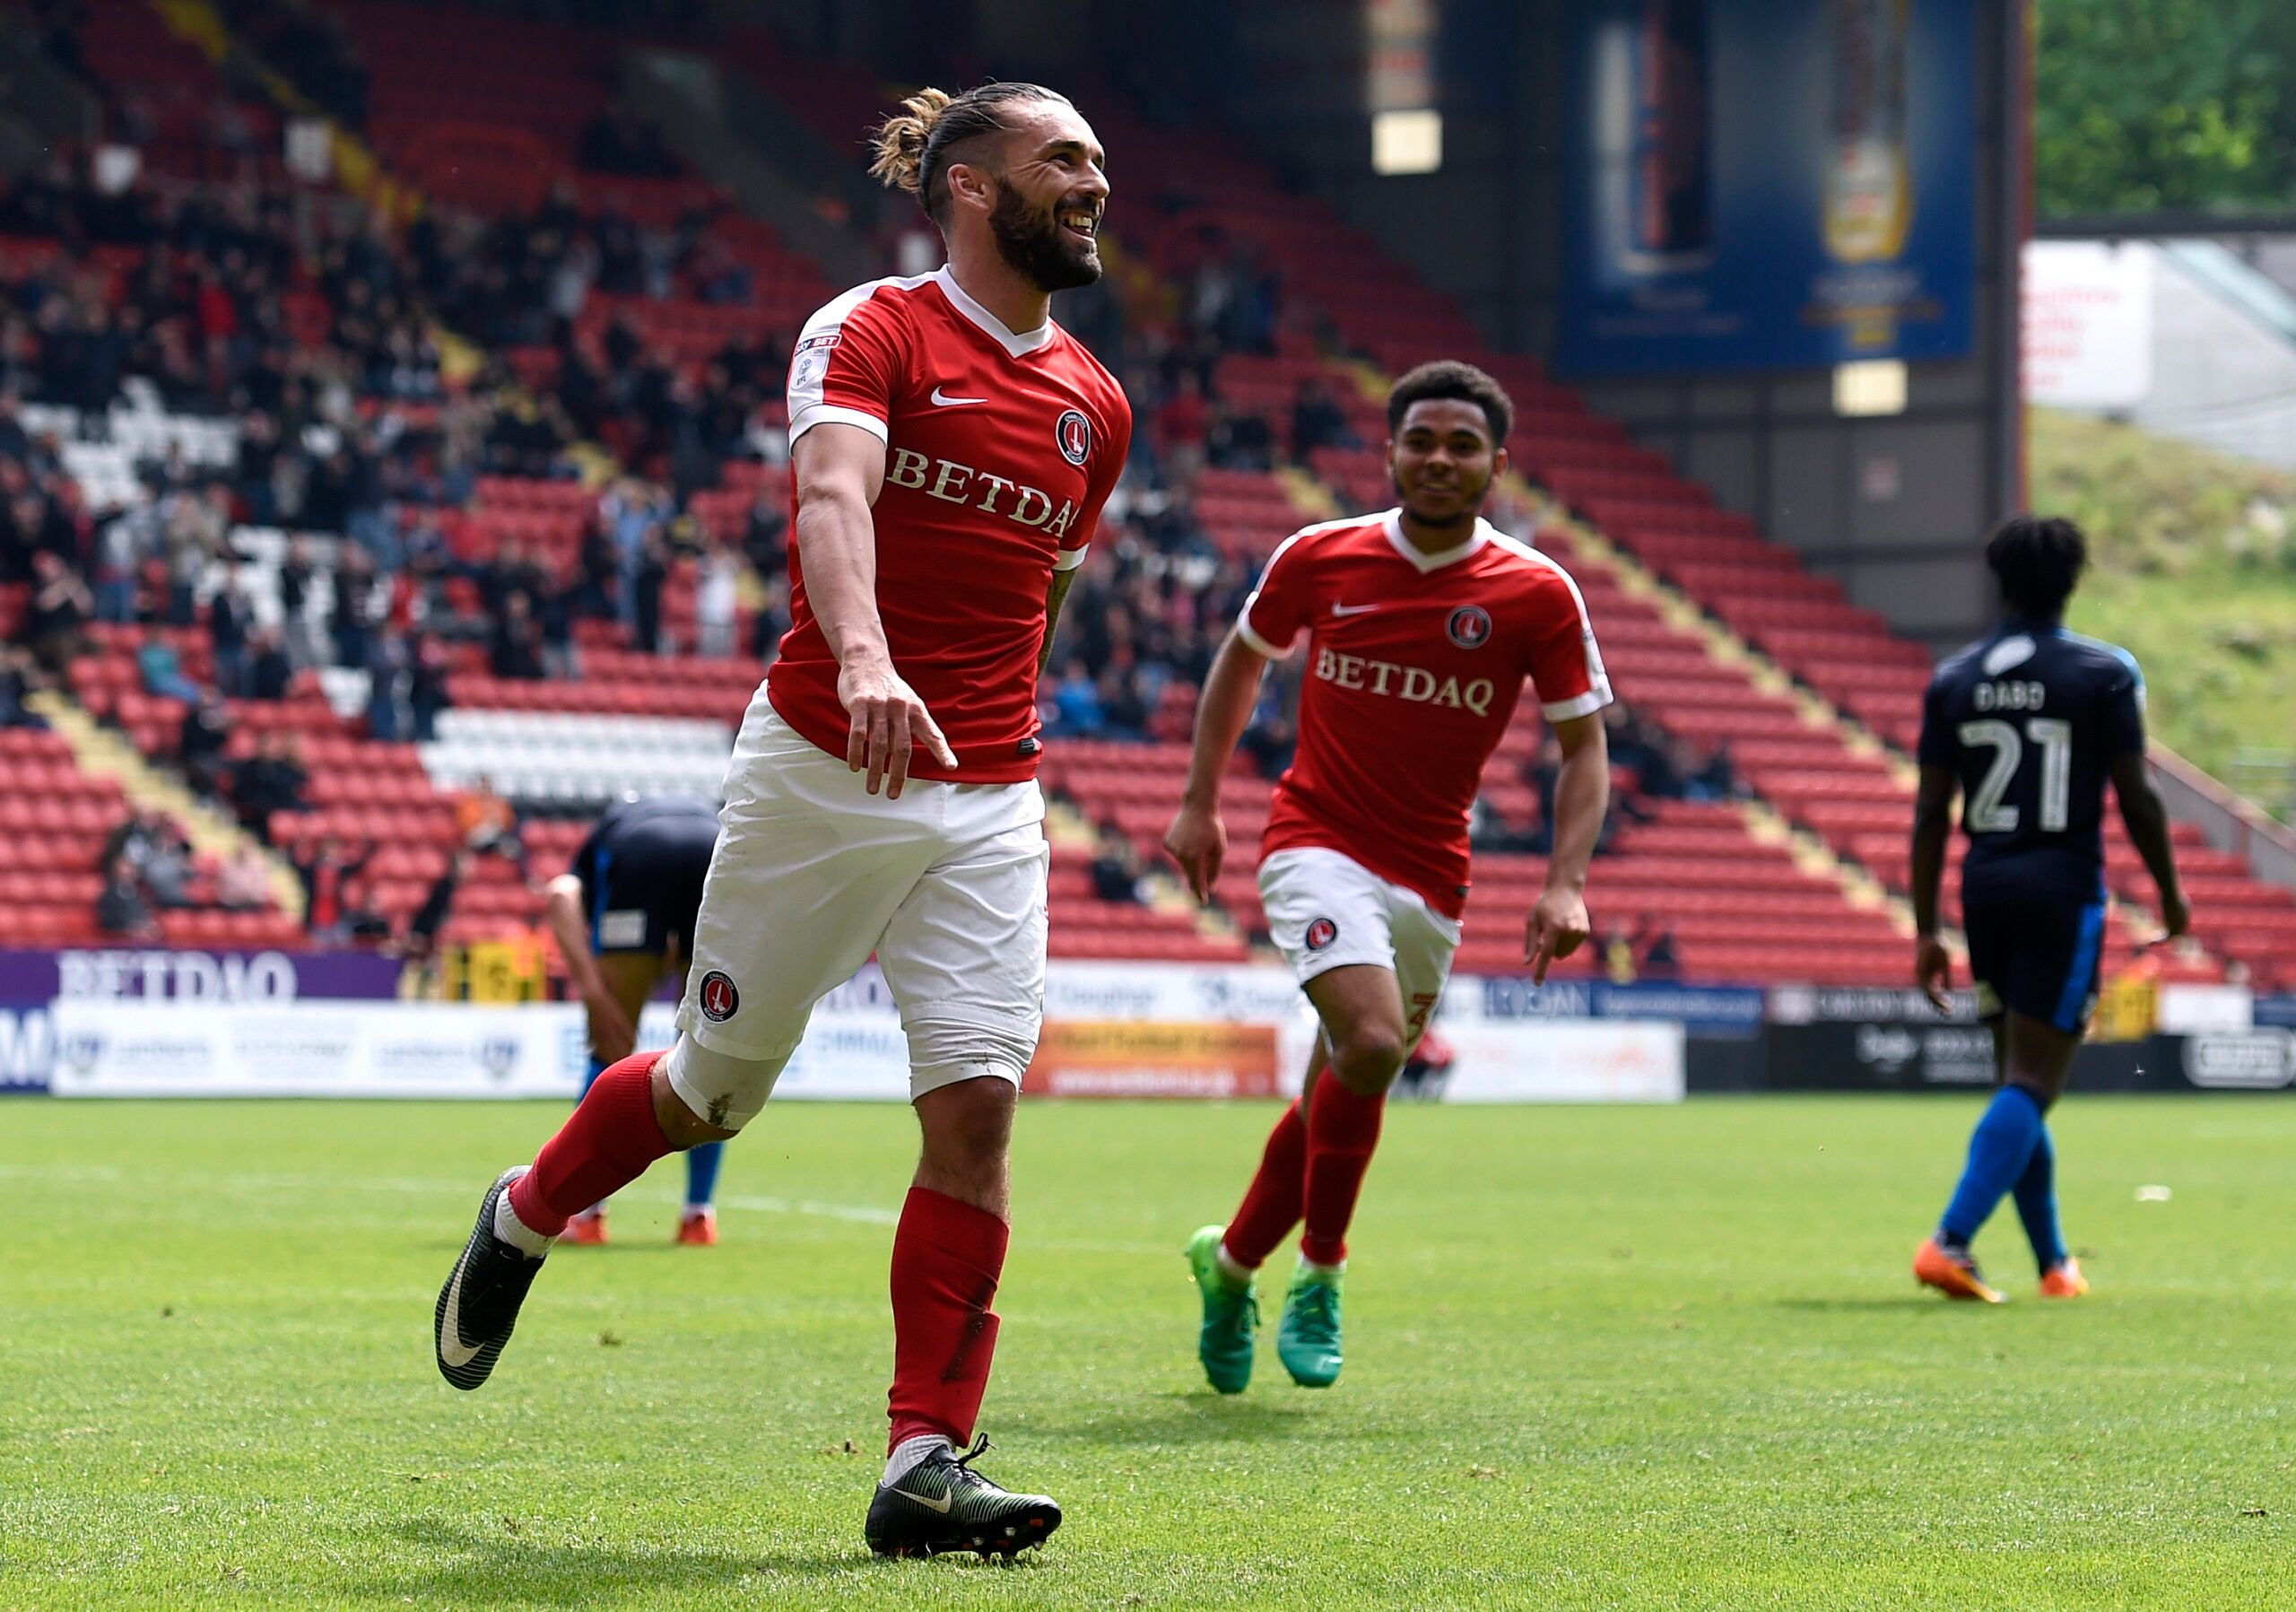 Britain Football Soccer - Charlton Athletic v Swindon Town - Sky Bet League One - The Valley - 30/4/17 Charlton Athletic's Ricky Holmes celebrates scoring their third goal  Mandatory Credit: Action Images / Adam Holt Livepic EDITORIAL USE ONLY. No use with unauthorized audio, video, data, fixture lists, club/league logos or 